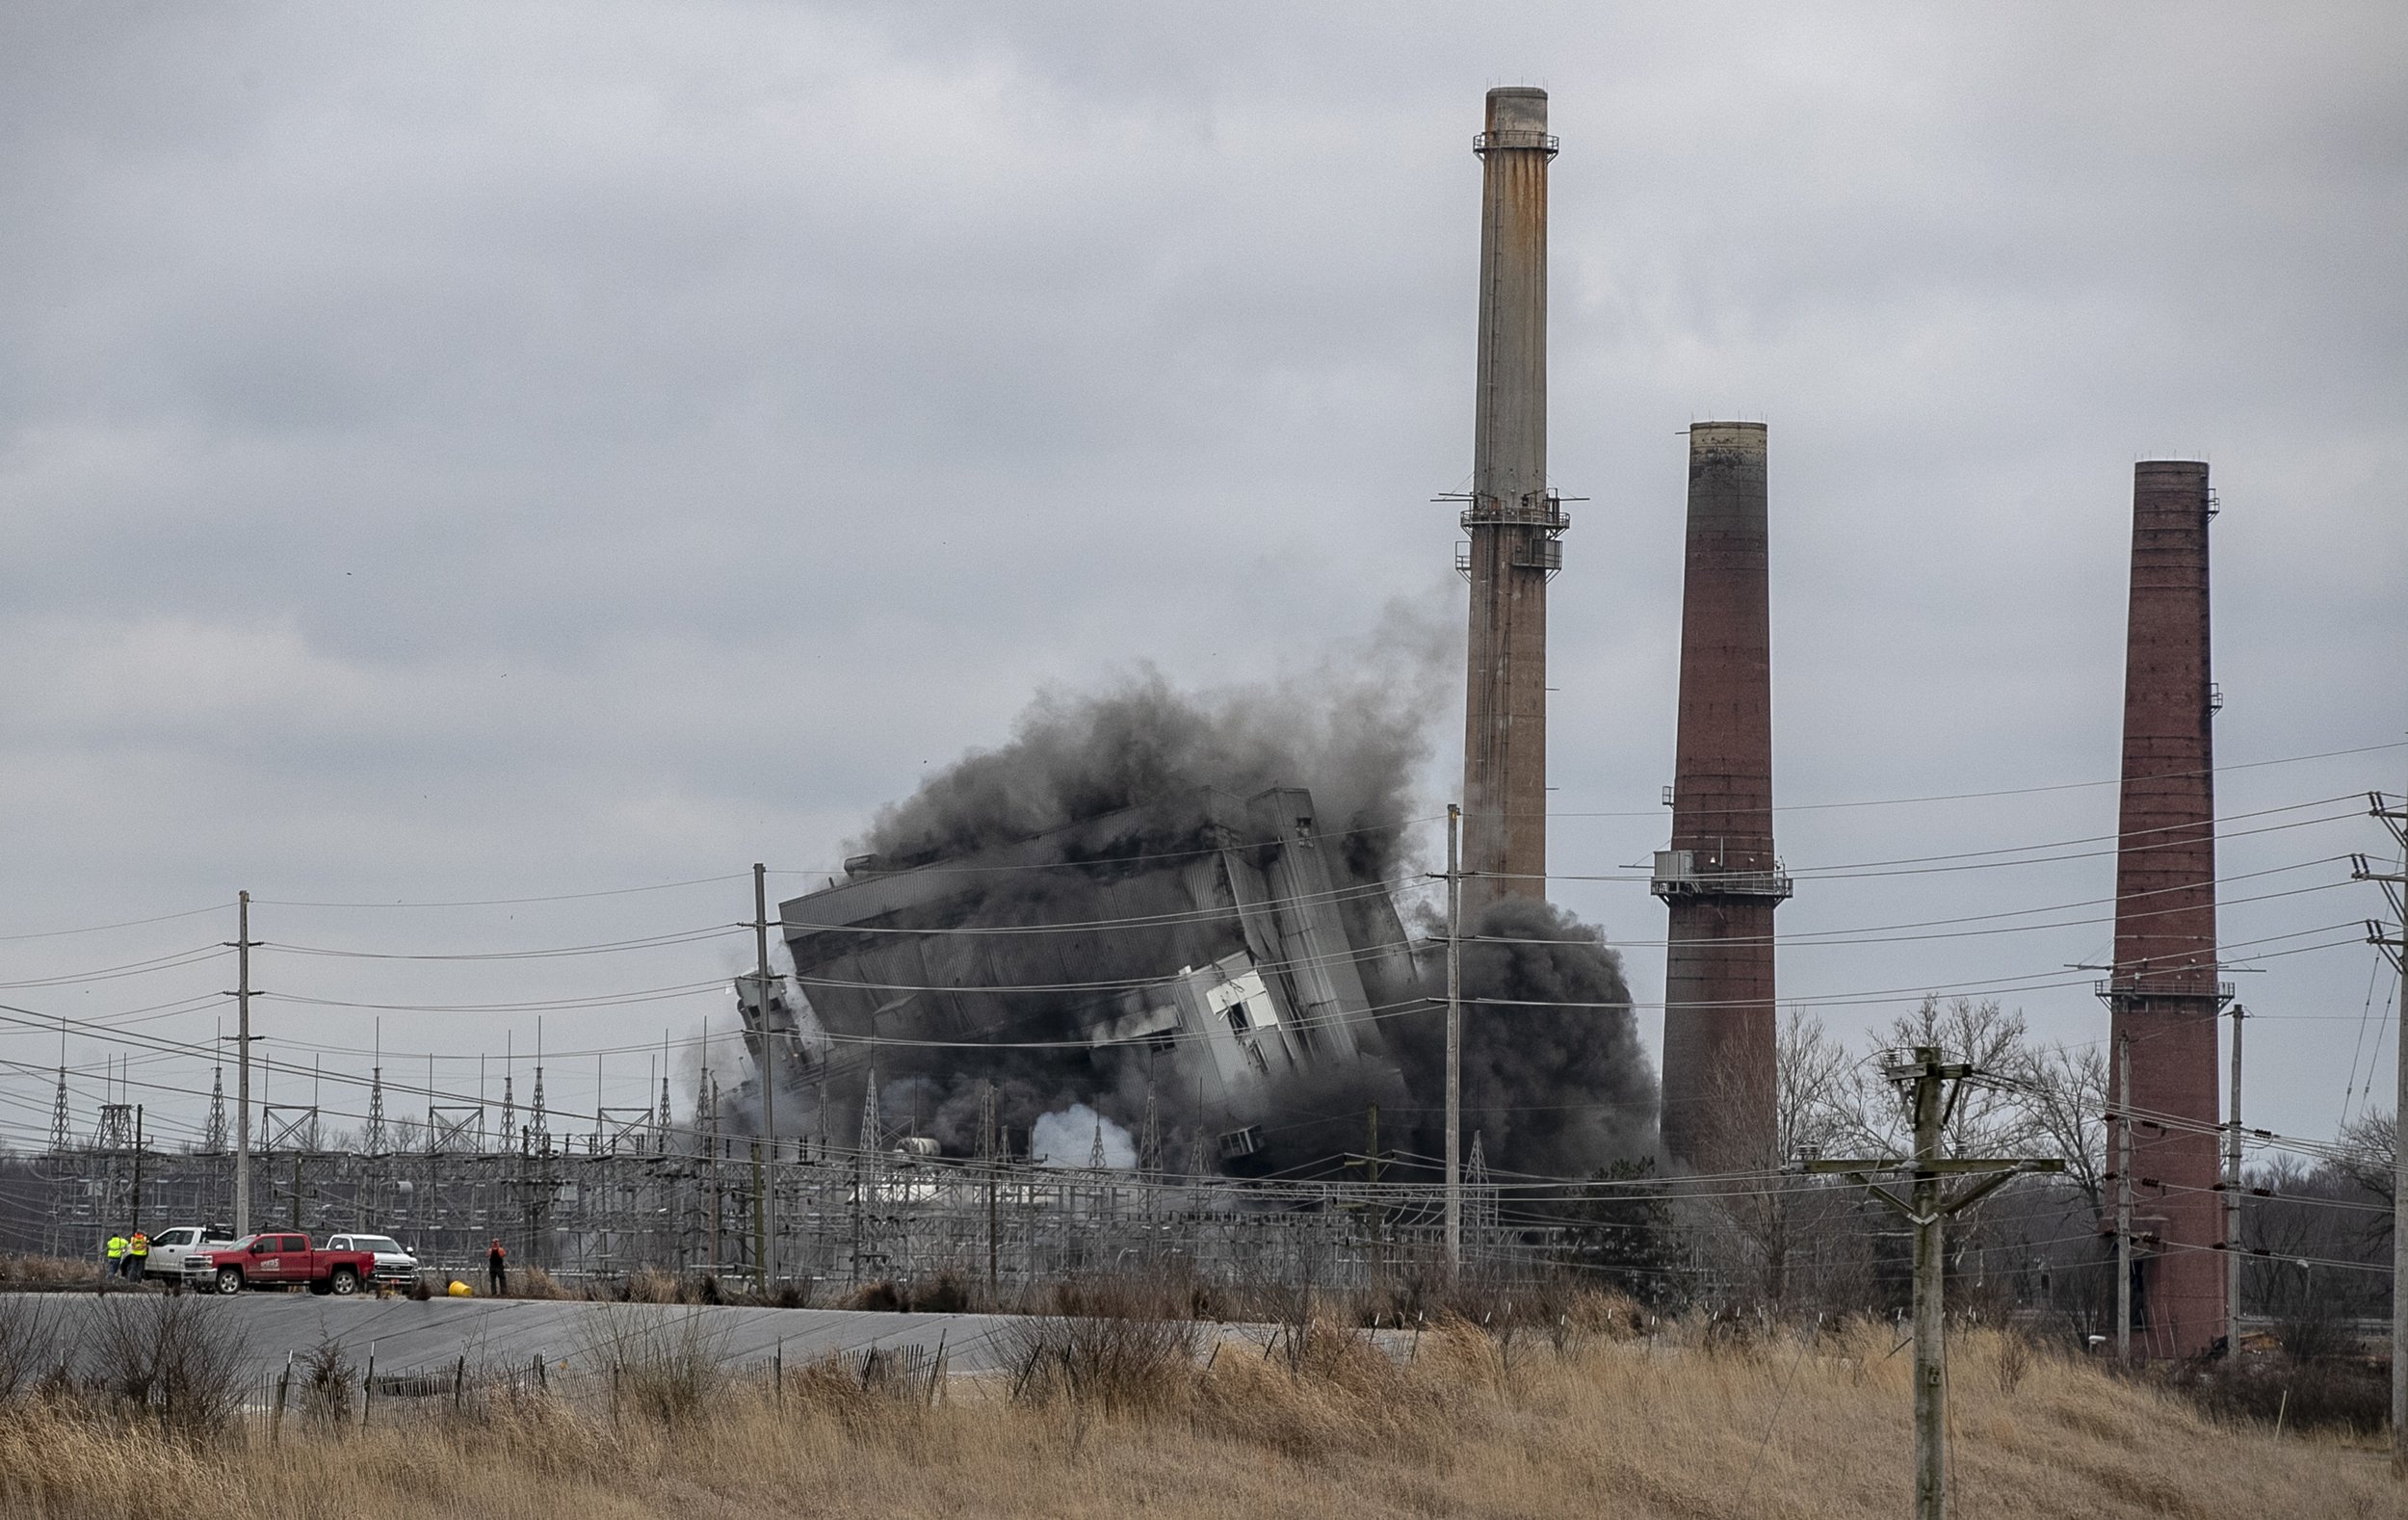 The Woodriver Power station in East Alton, Illinois falls down as it's demolished